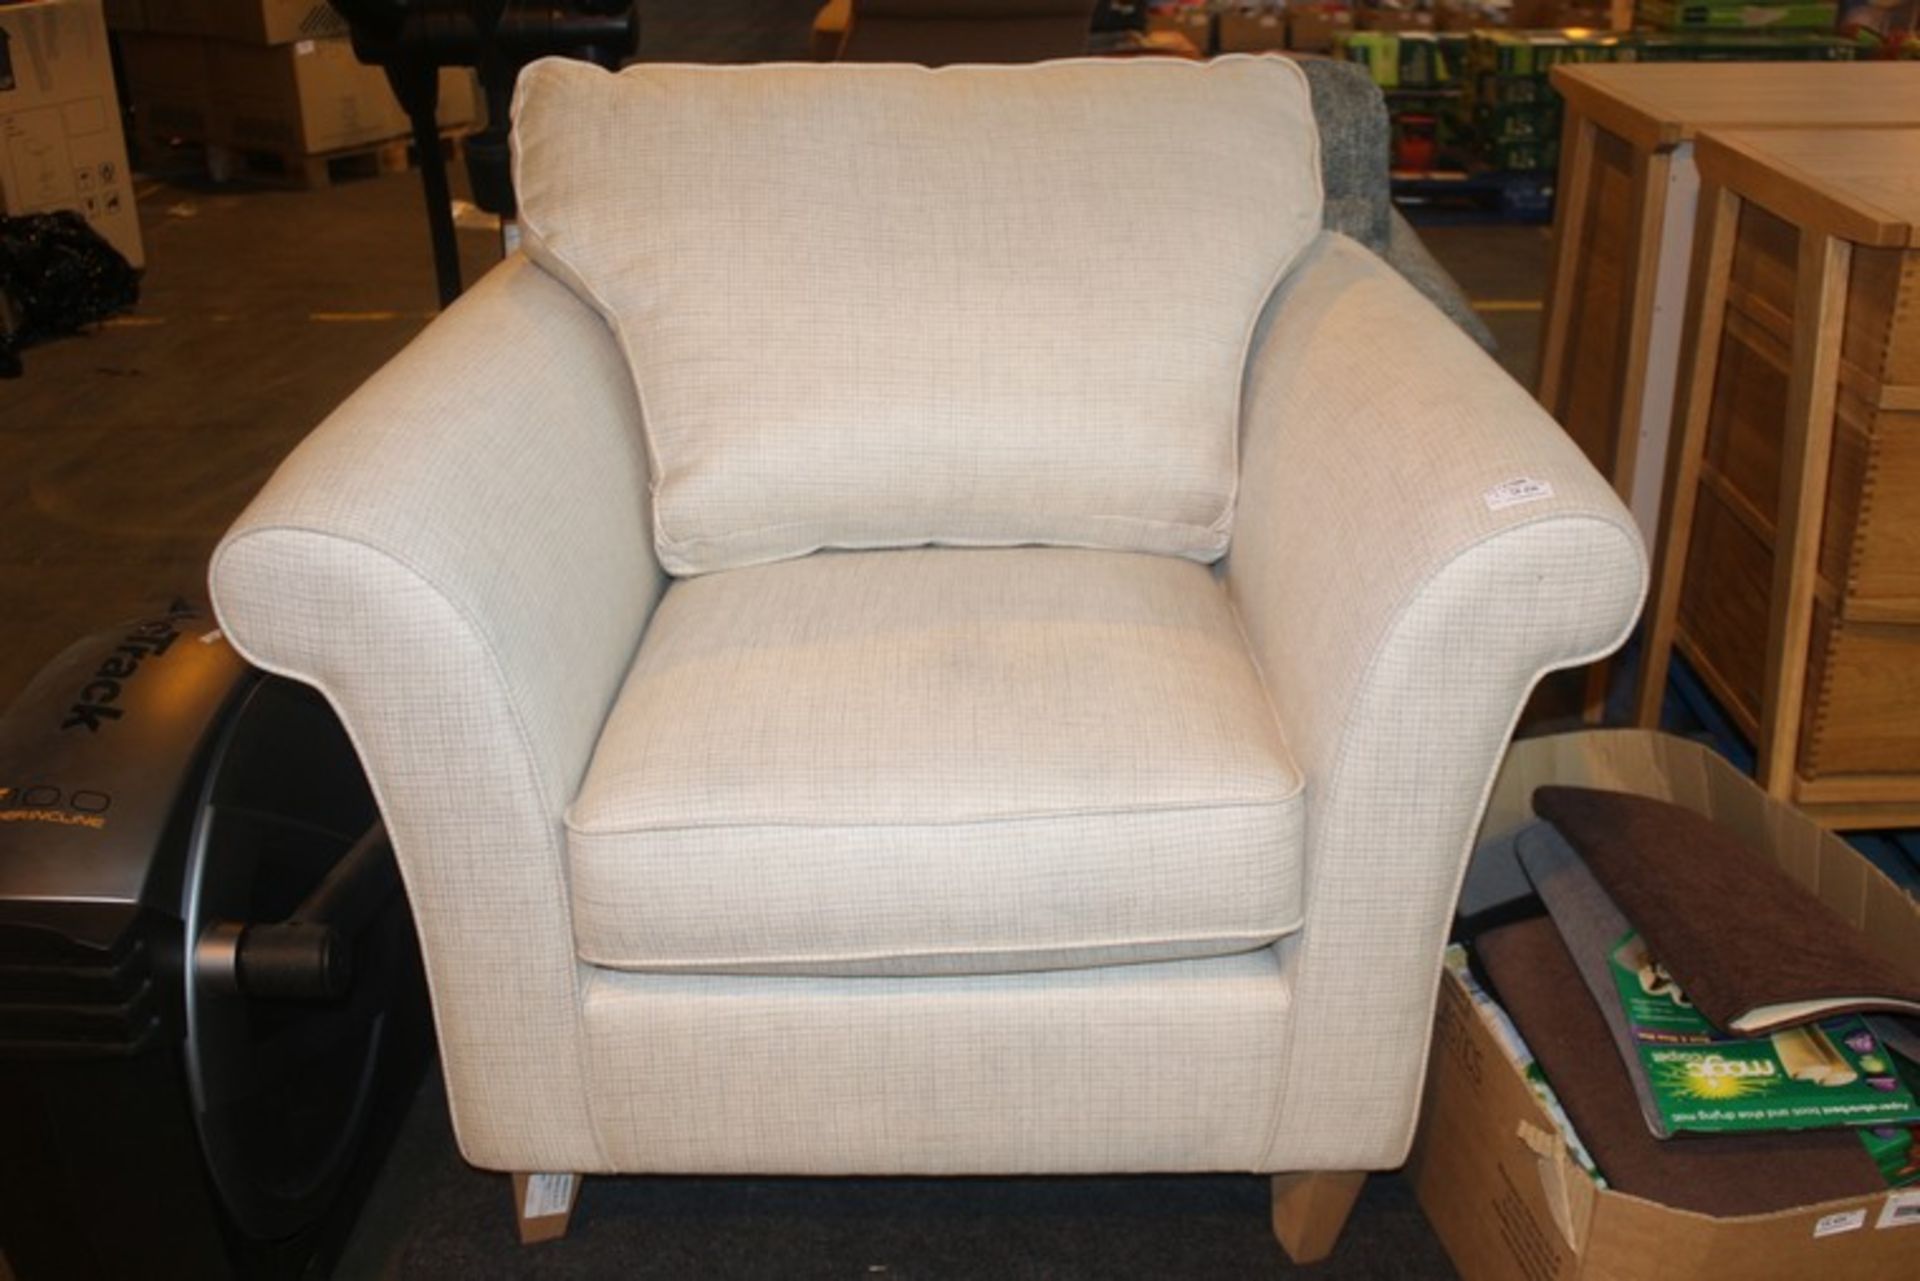 1 x CHARLOTTE SINGLE ARM CHAIR RRP £880 (20.10.17) (2337912) *PLEASE NOTE THAT THE BID PRICE IS